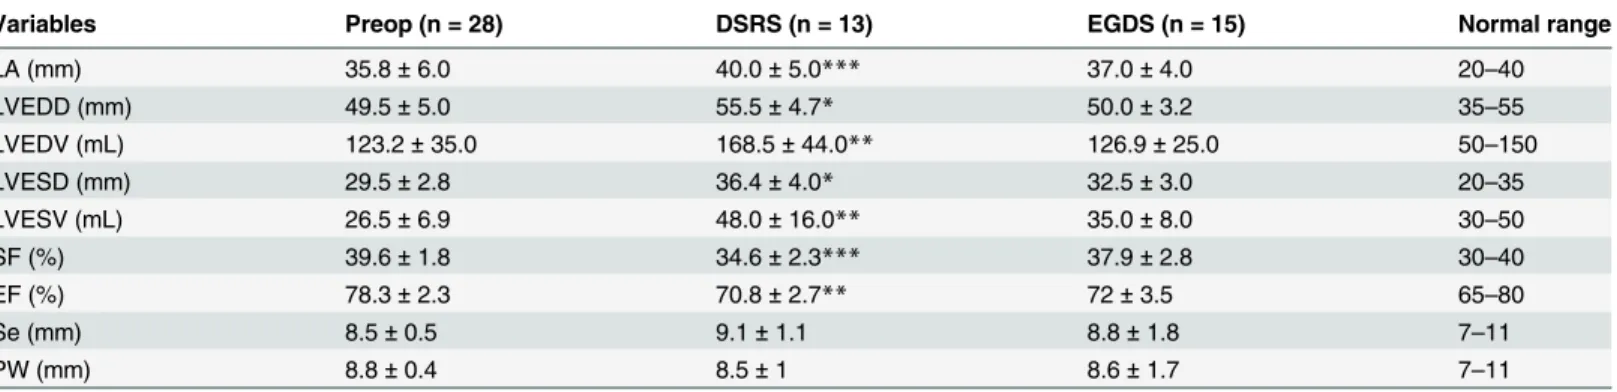 Table 2. Transthoracic echocardiography results in participants with mansonic schistosomiasis before (Preop) and after surgical treatment for portal hypertension by distal splenorenal shunt (DSRS) and esophagogastric devascularization with splenectomy (EGD